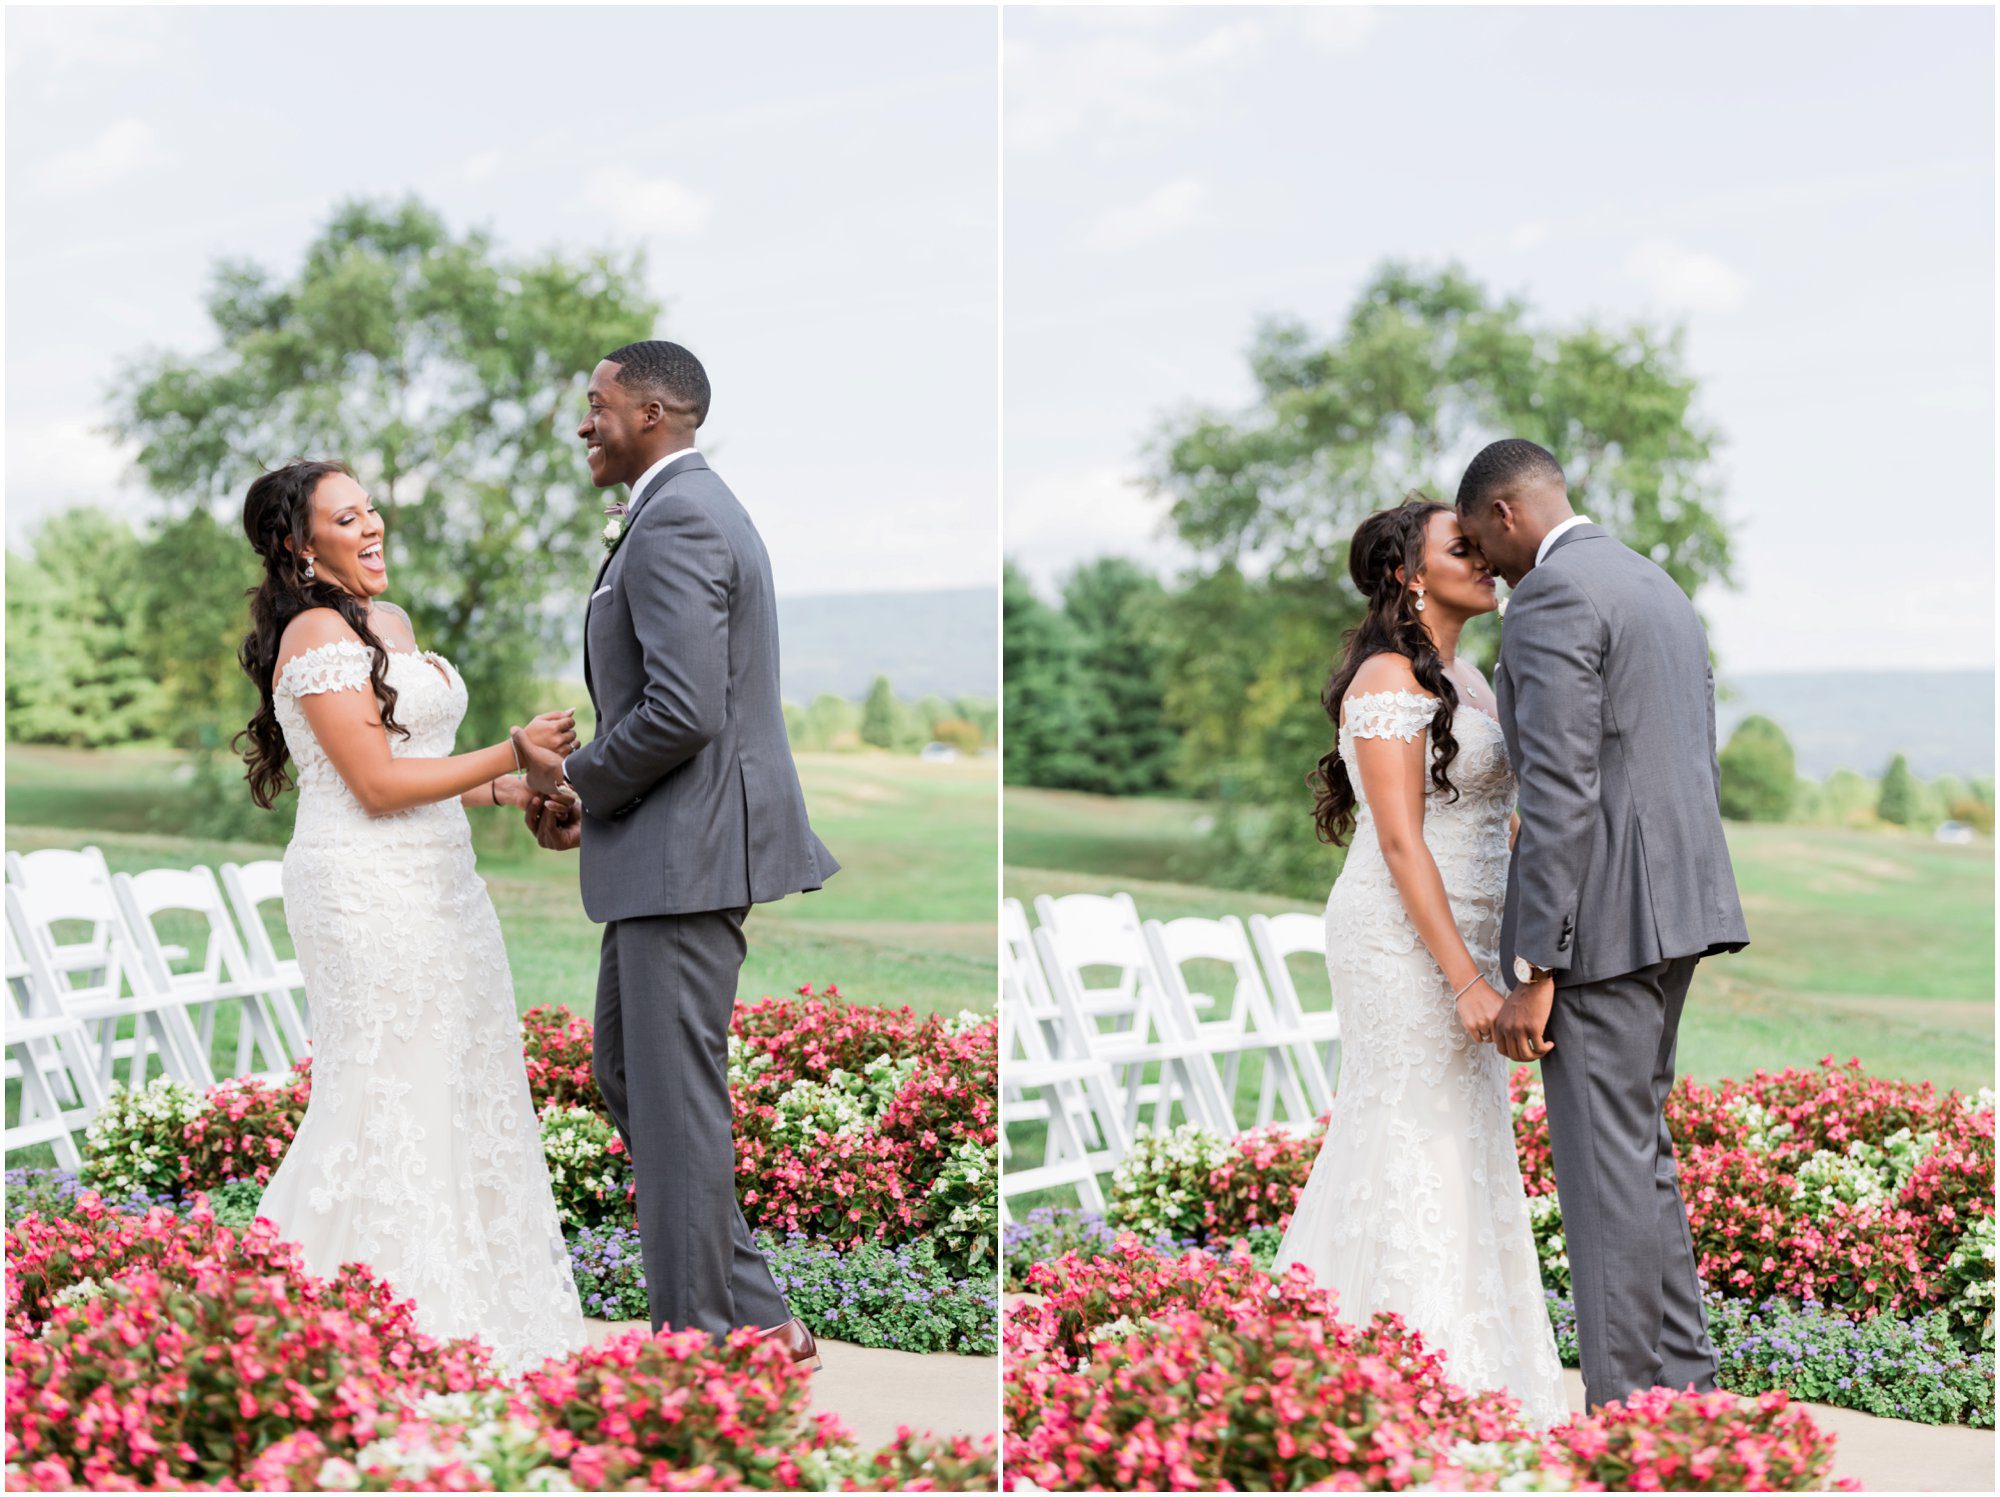 Aireannah & Marquis Bowling Green Country Club Front Royal Franzi Lee Photography-2656.jpg